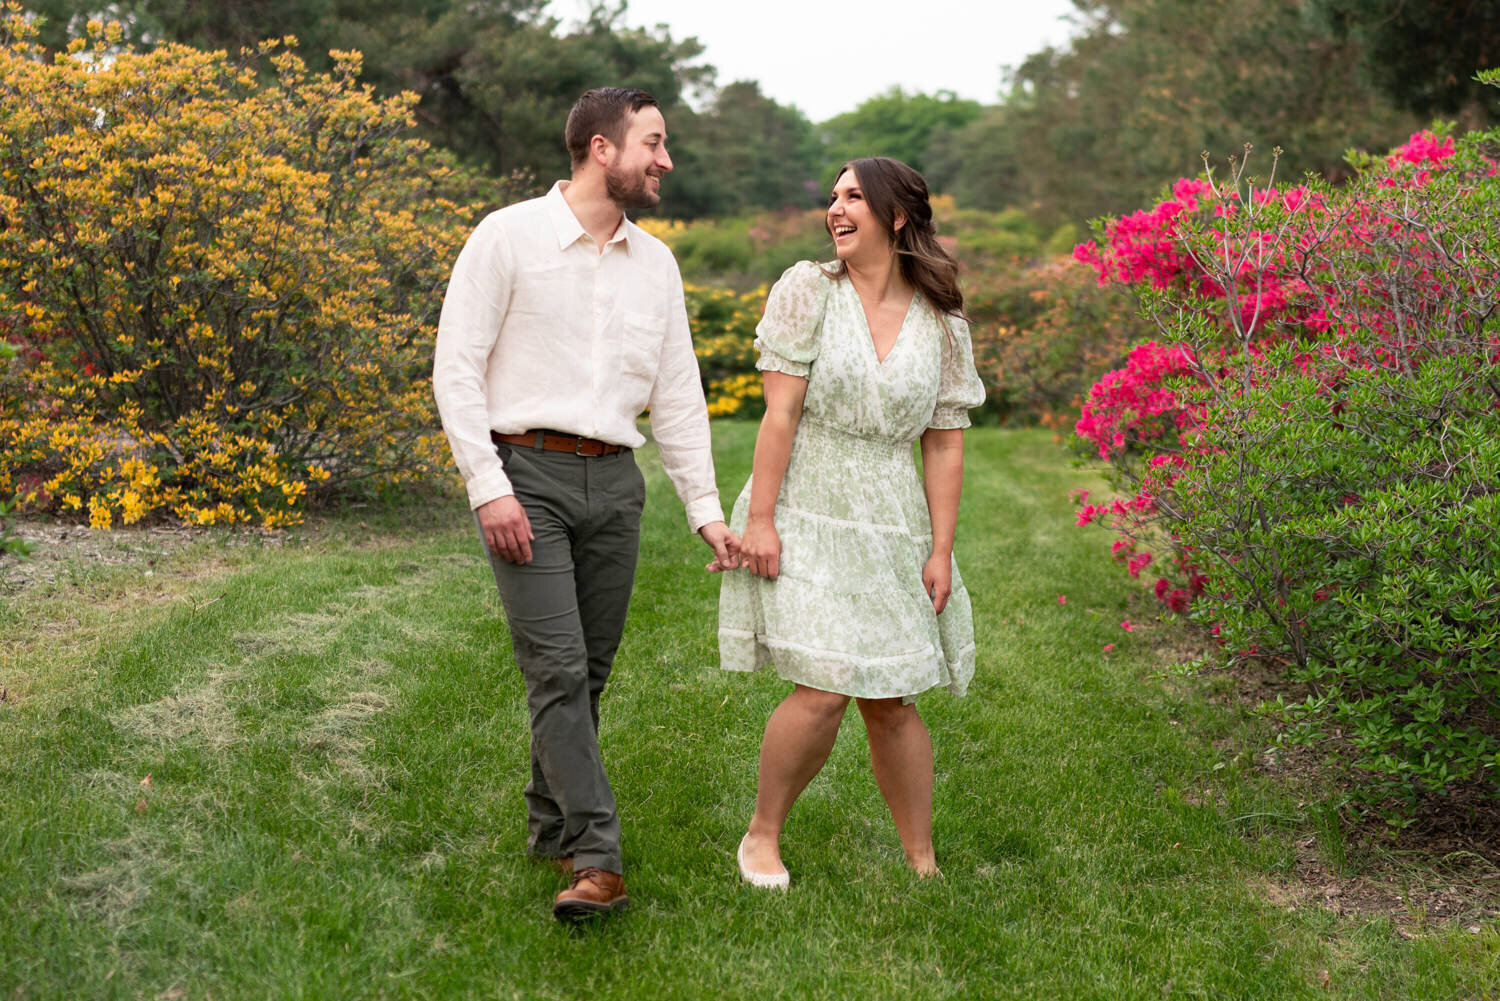 Man and woman laugh while walking through a garden of flowers.